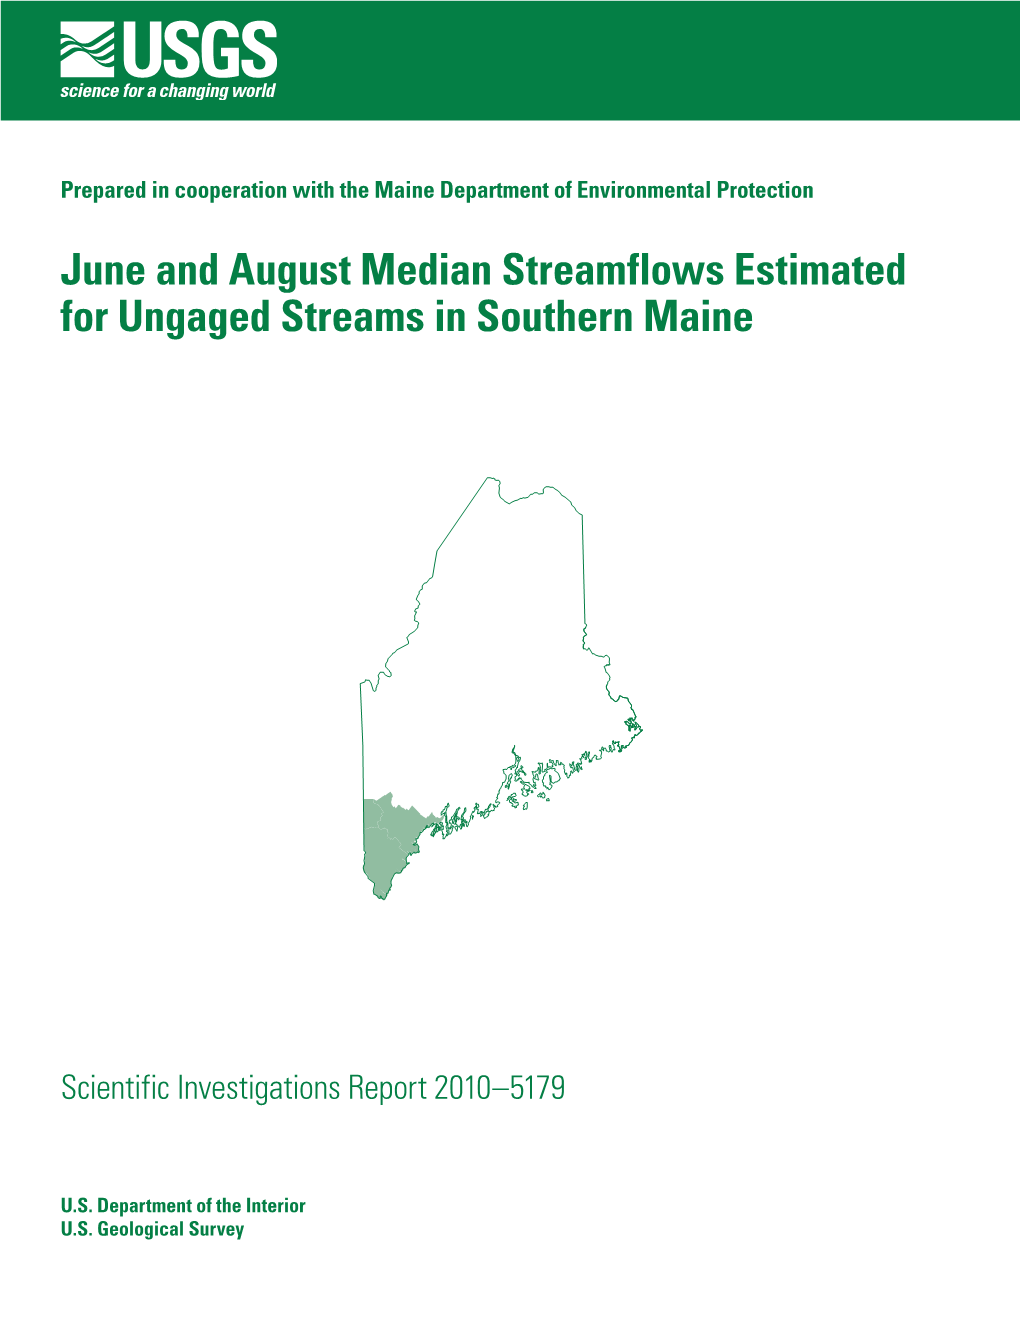 Lombard, P.J., 2010, June and August Median Streamflows Estimated for Ungaged Streams in Southern Maine: U.S